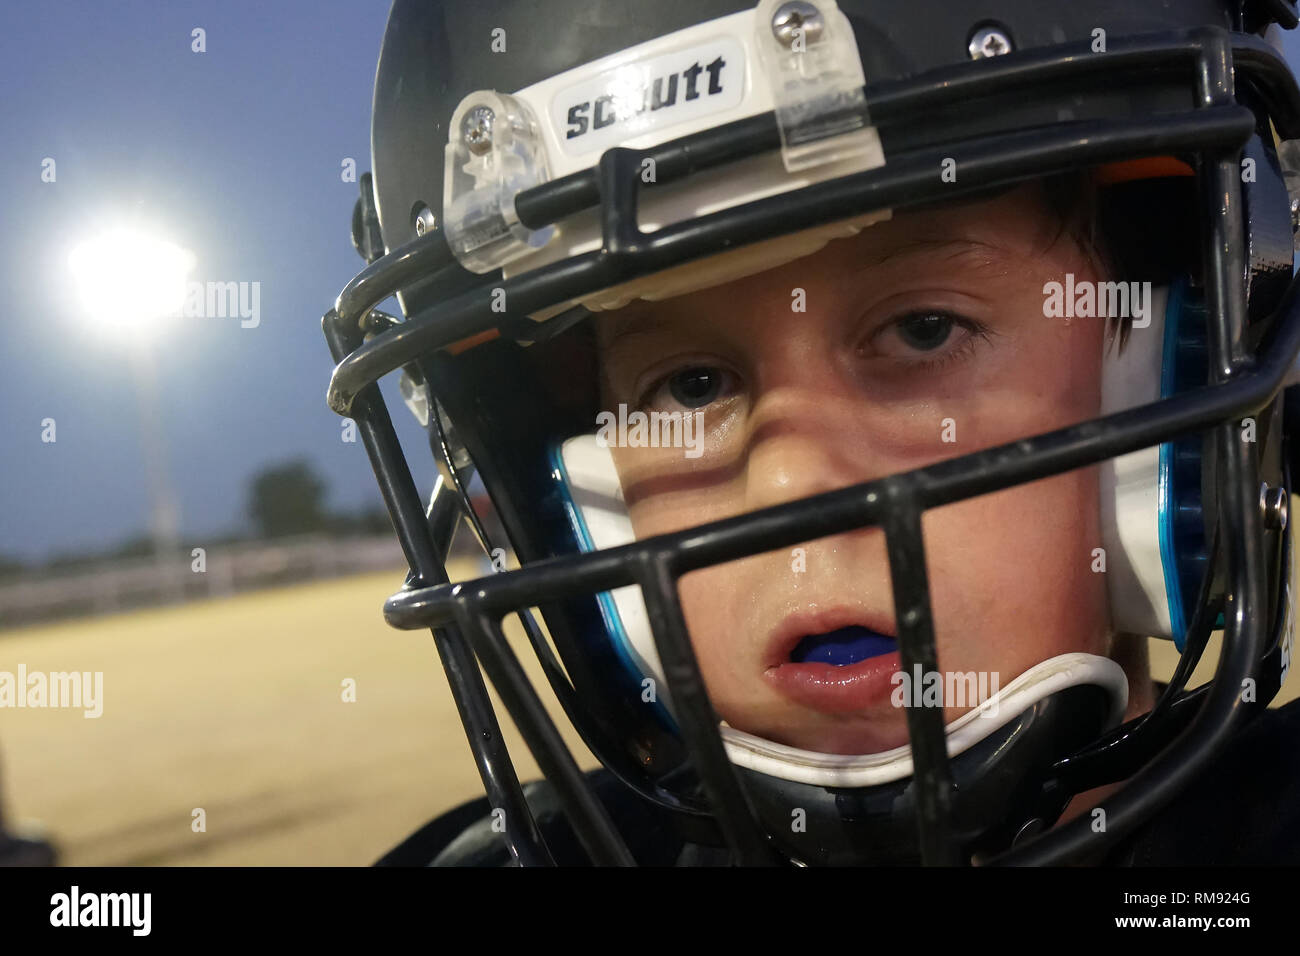 A close up of a boy wearing a football helmet during practice. Stock Photo